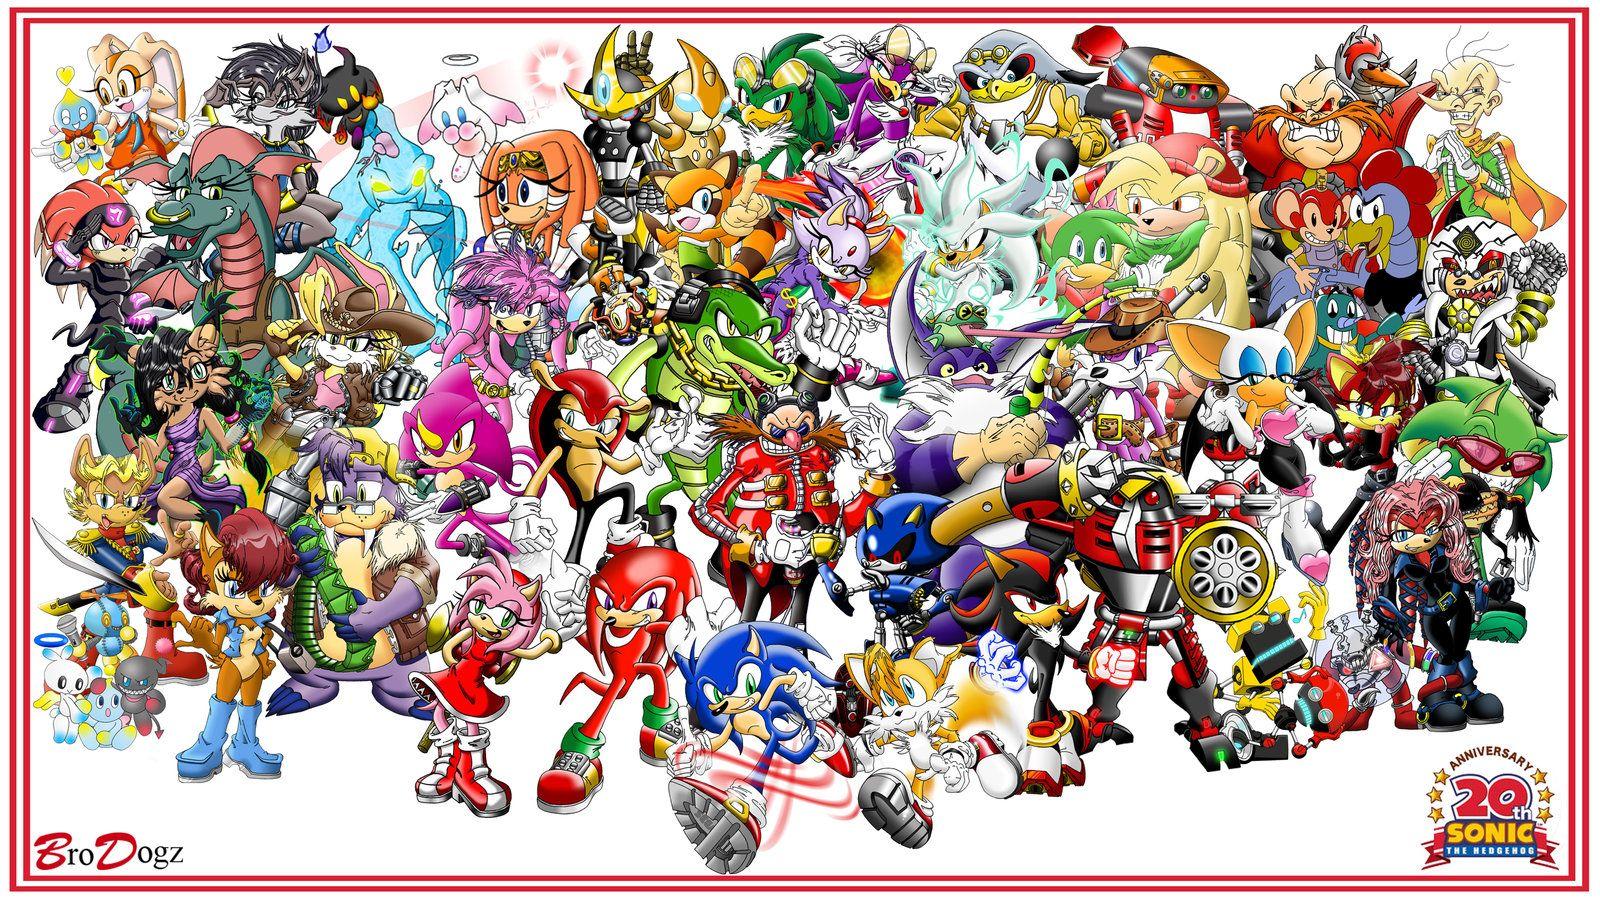 1. Sonic the Hedgehog - wide 7